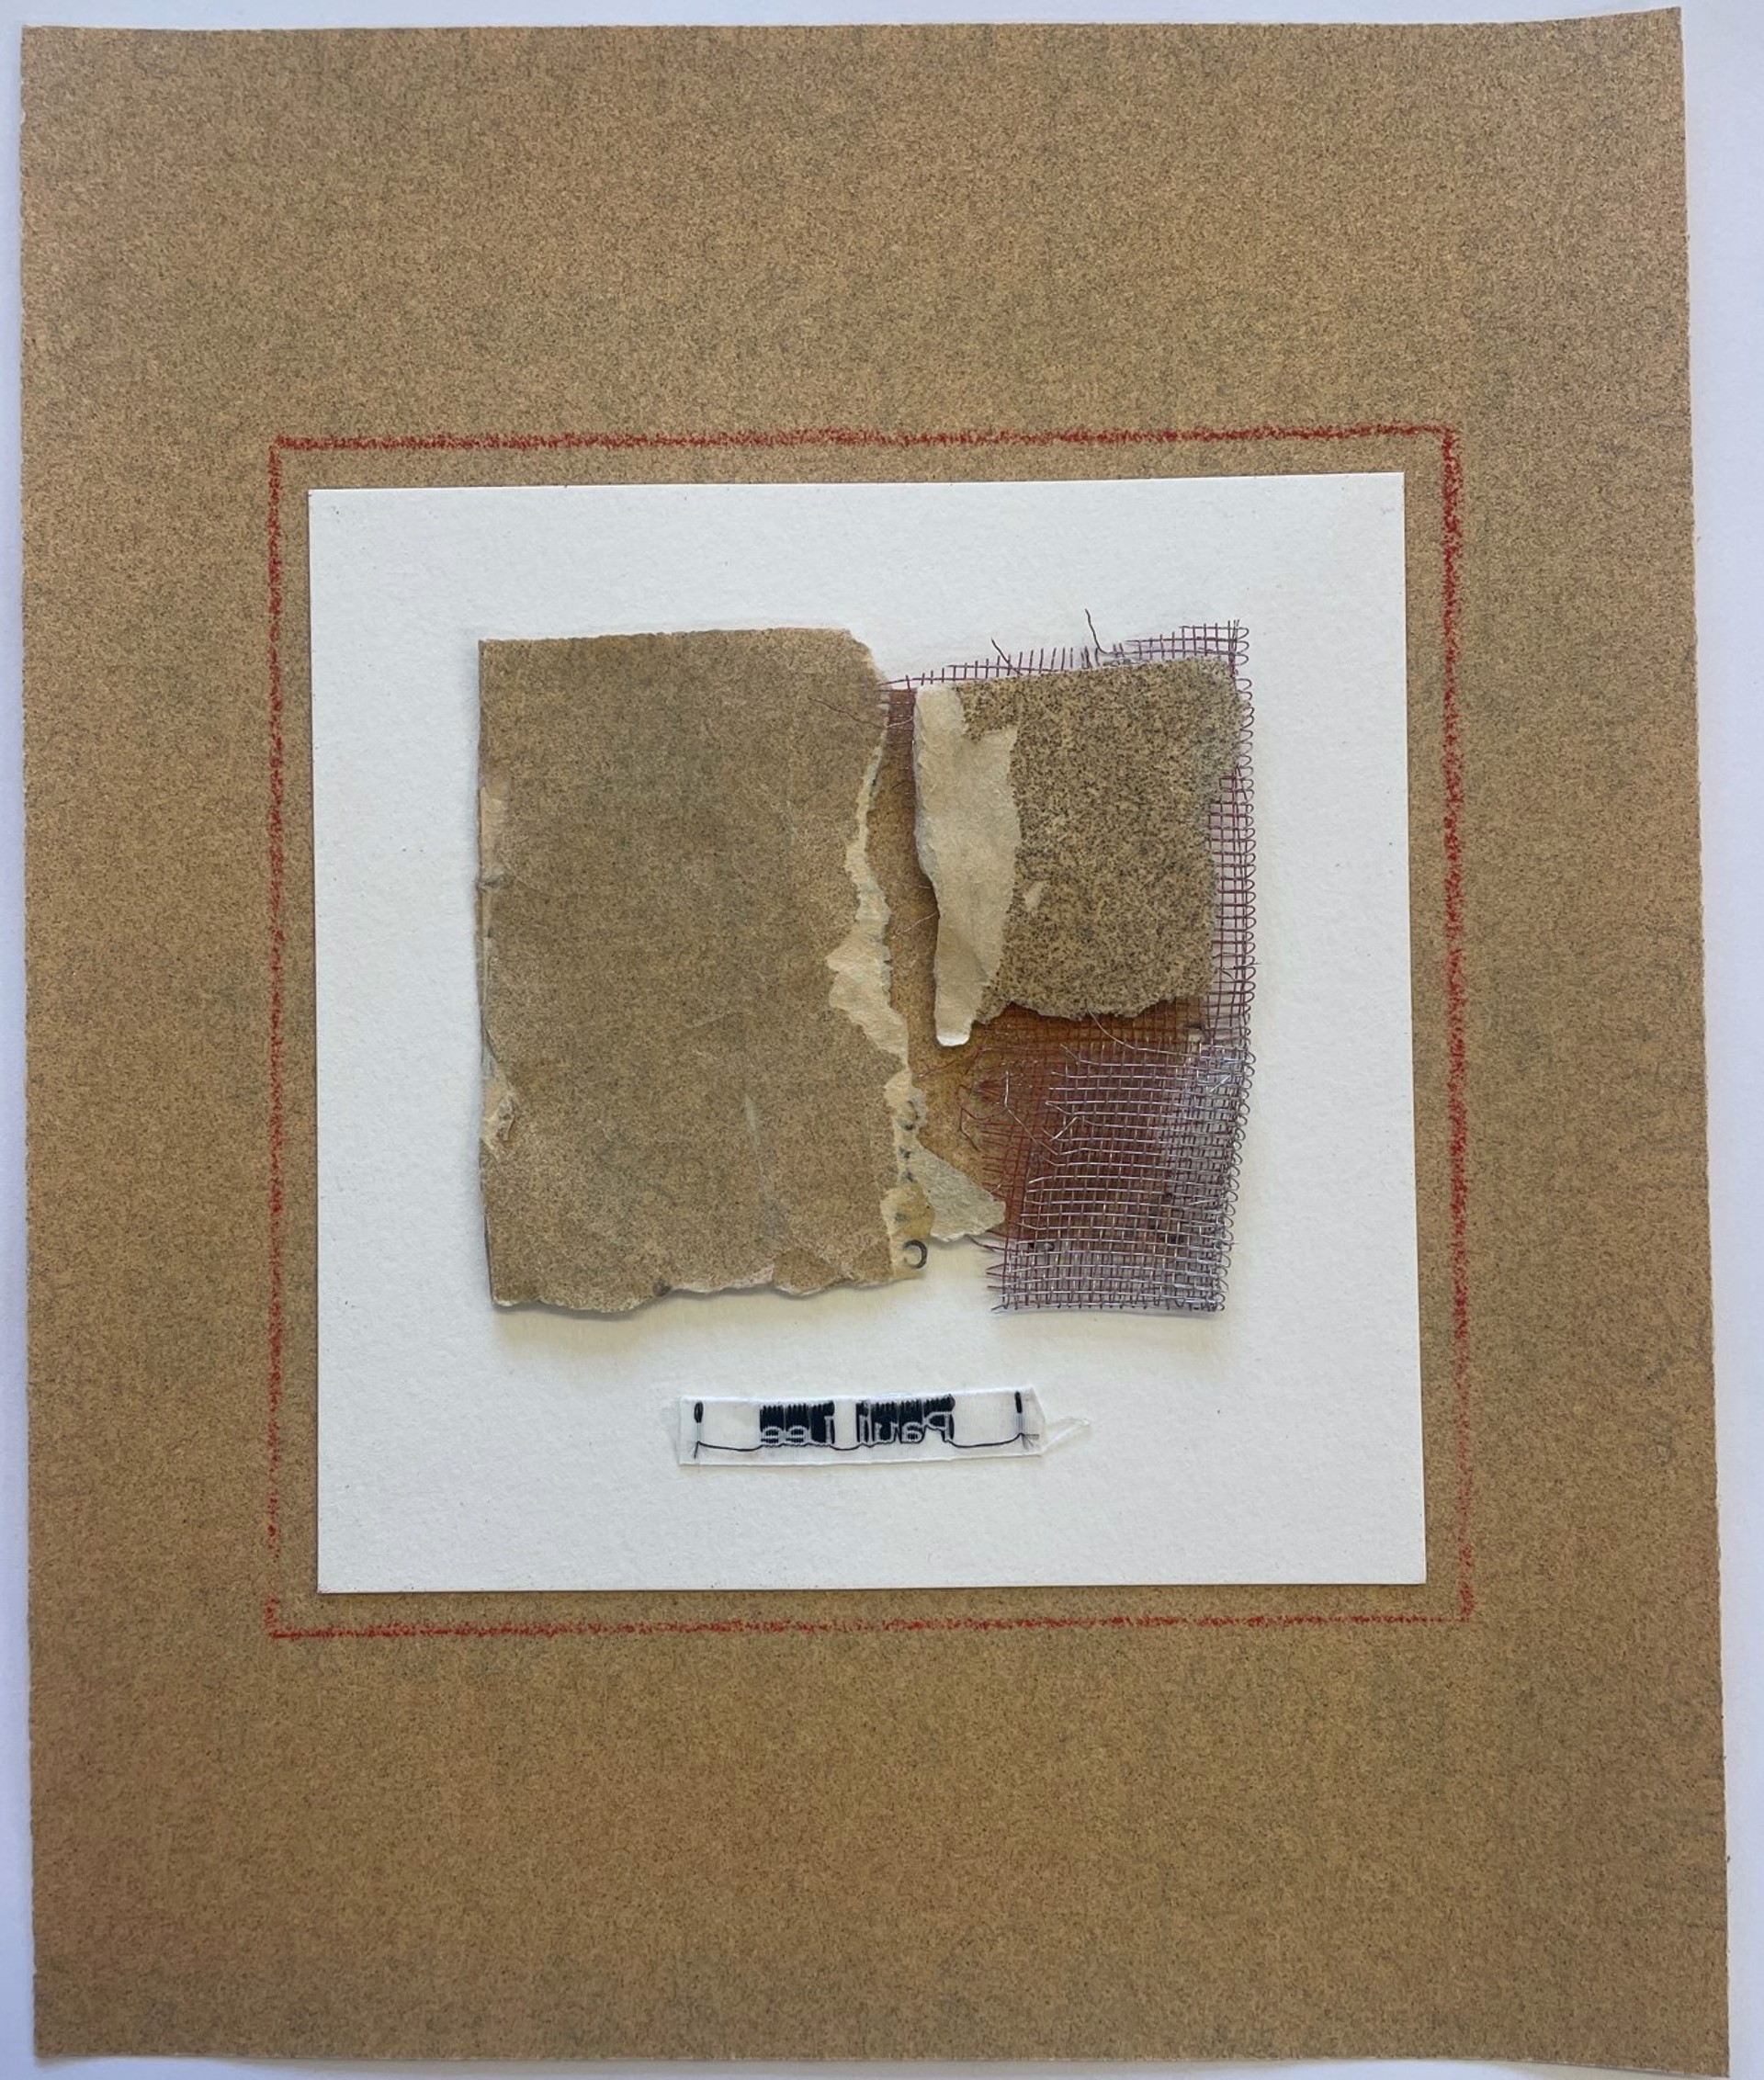 Sandpaper Collage No. 1 by Paul Lee